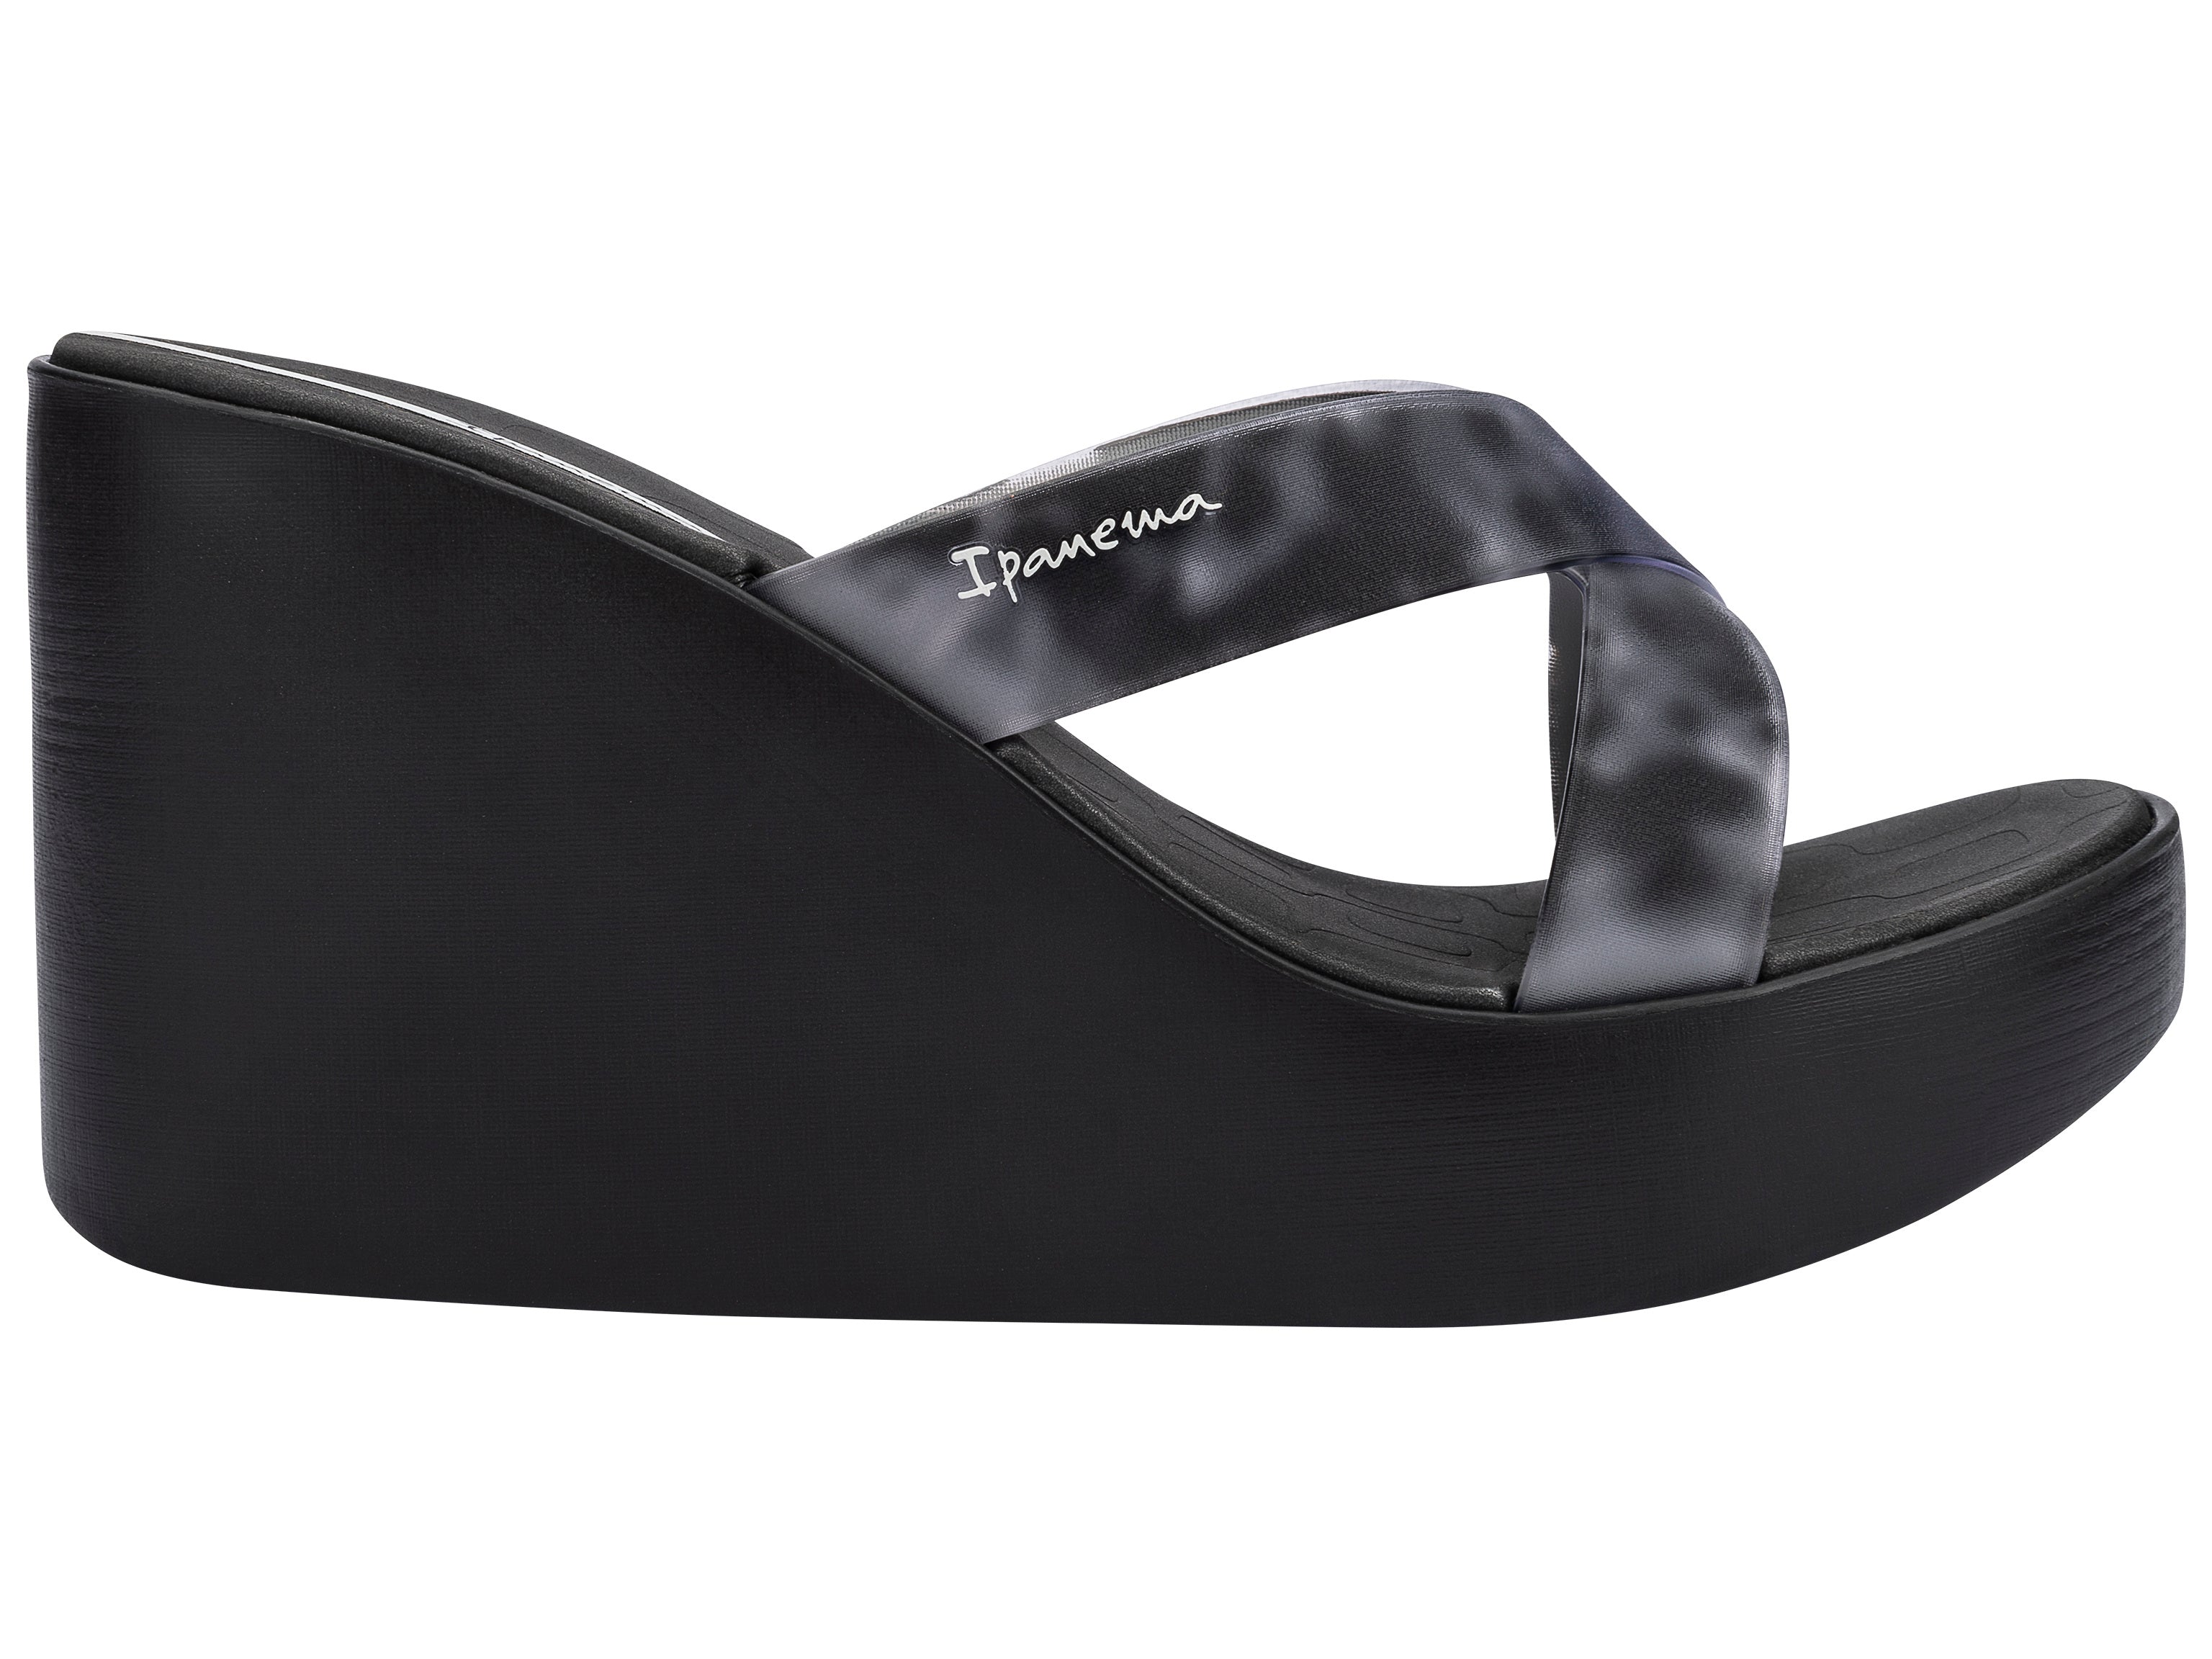 Outer side view of a black Ipanema High Fashion women's wedge platform flip flop.